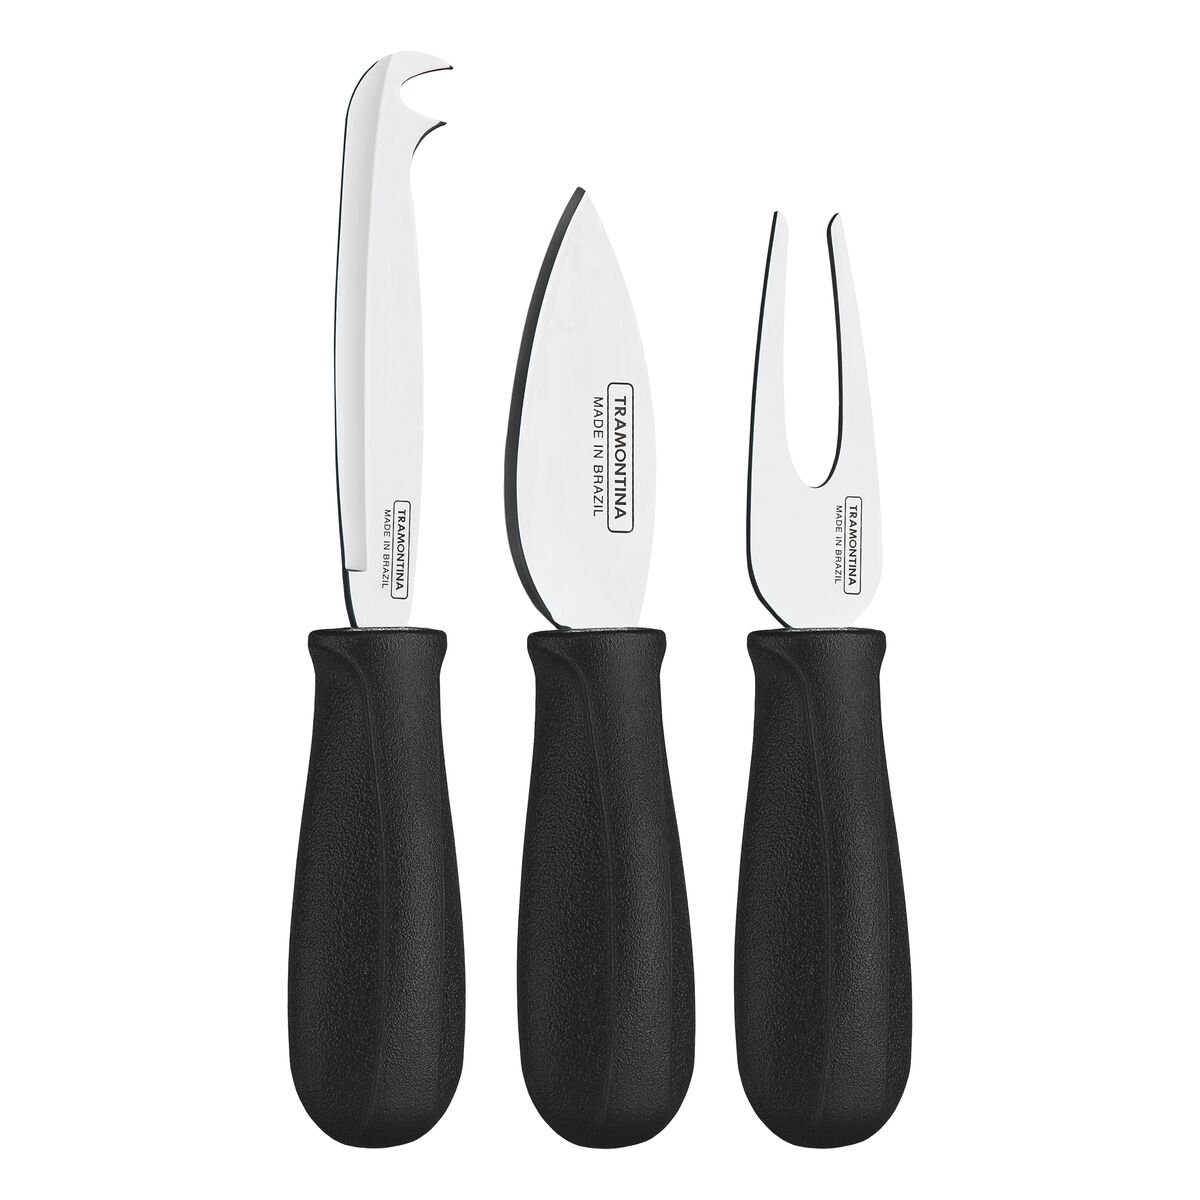 Tramontina Harmoniza 3-Piece Cheese Set with Stainless Steel Blades and Black Polypropylene Handles